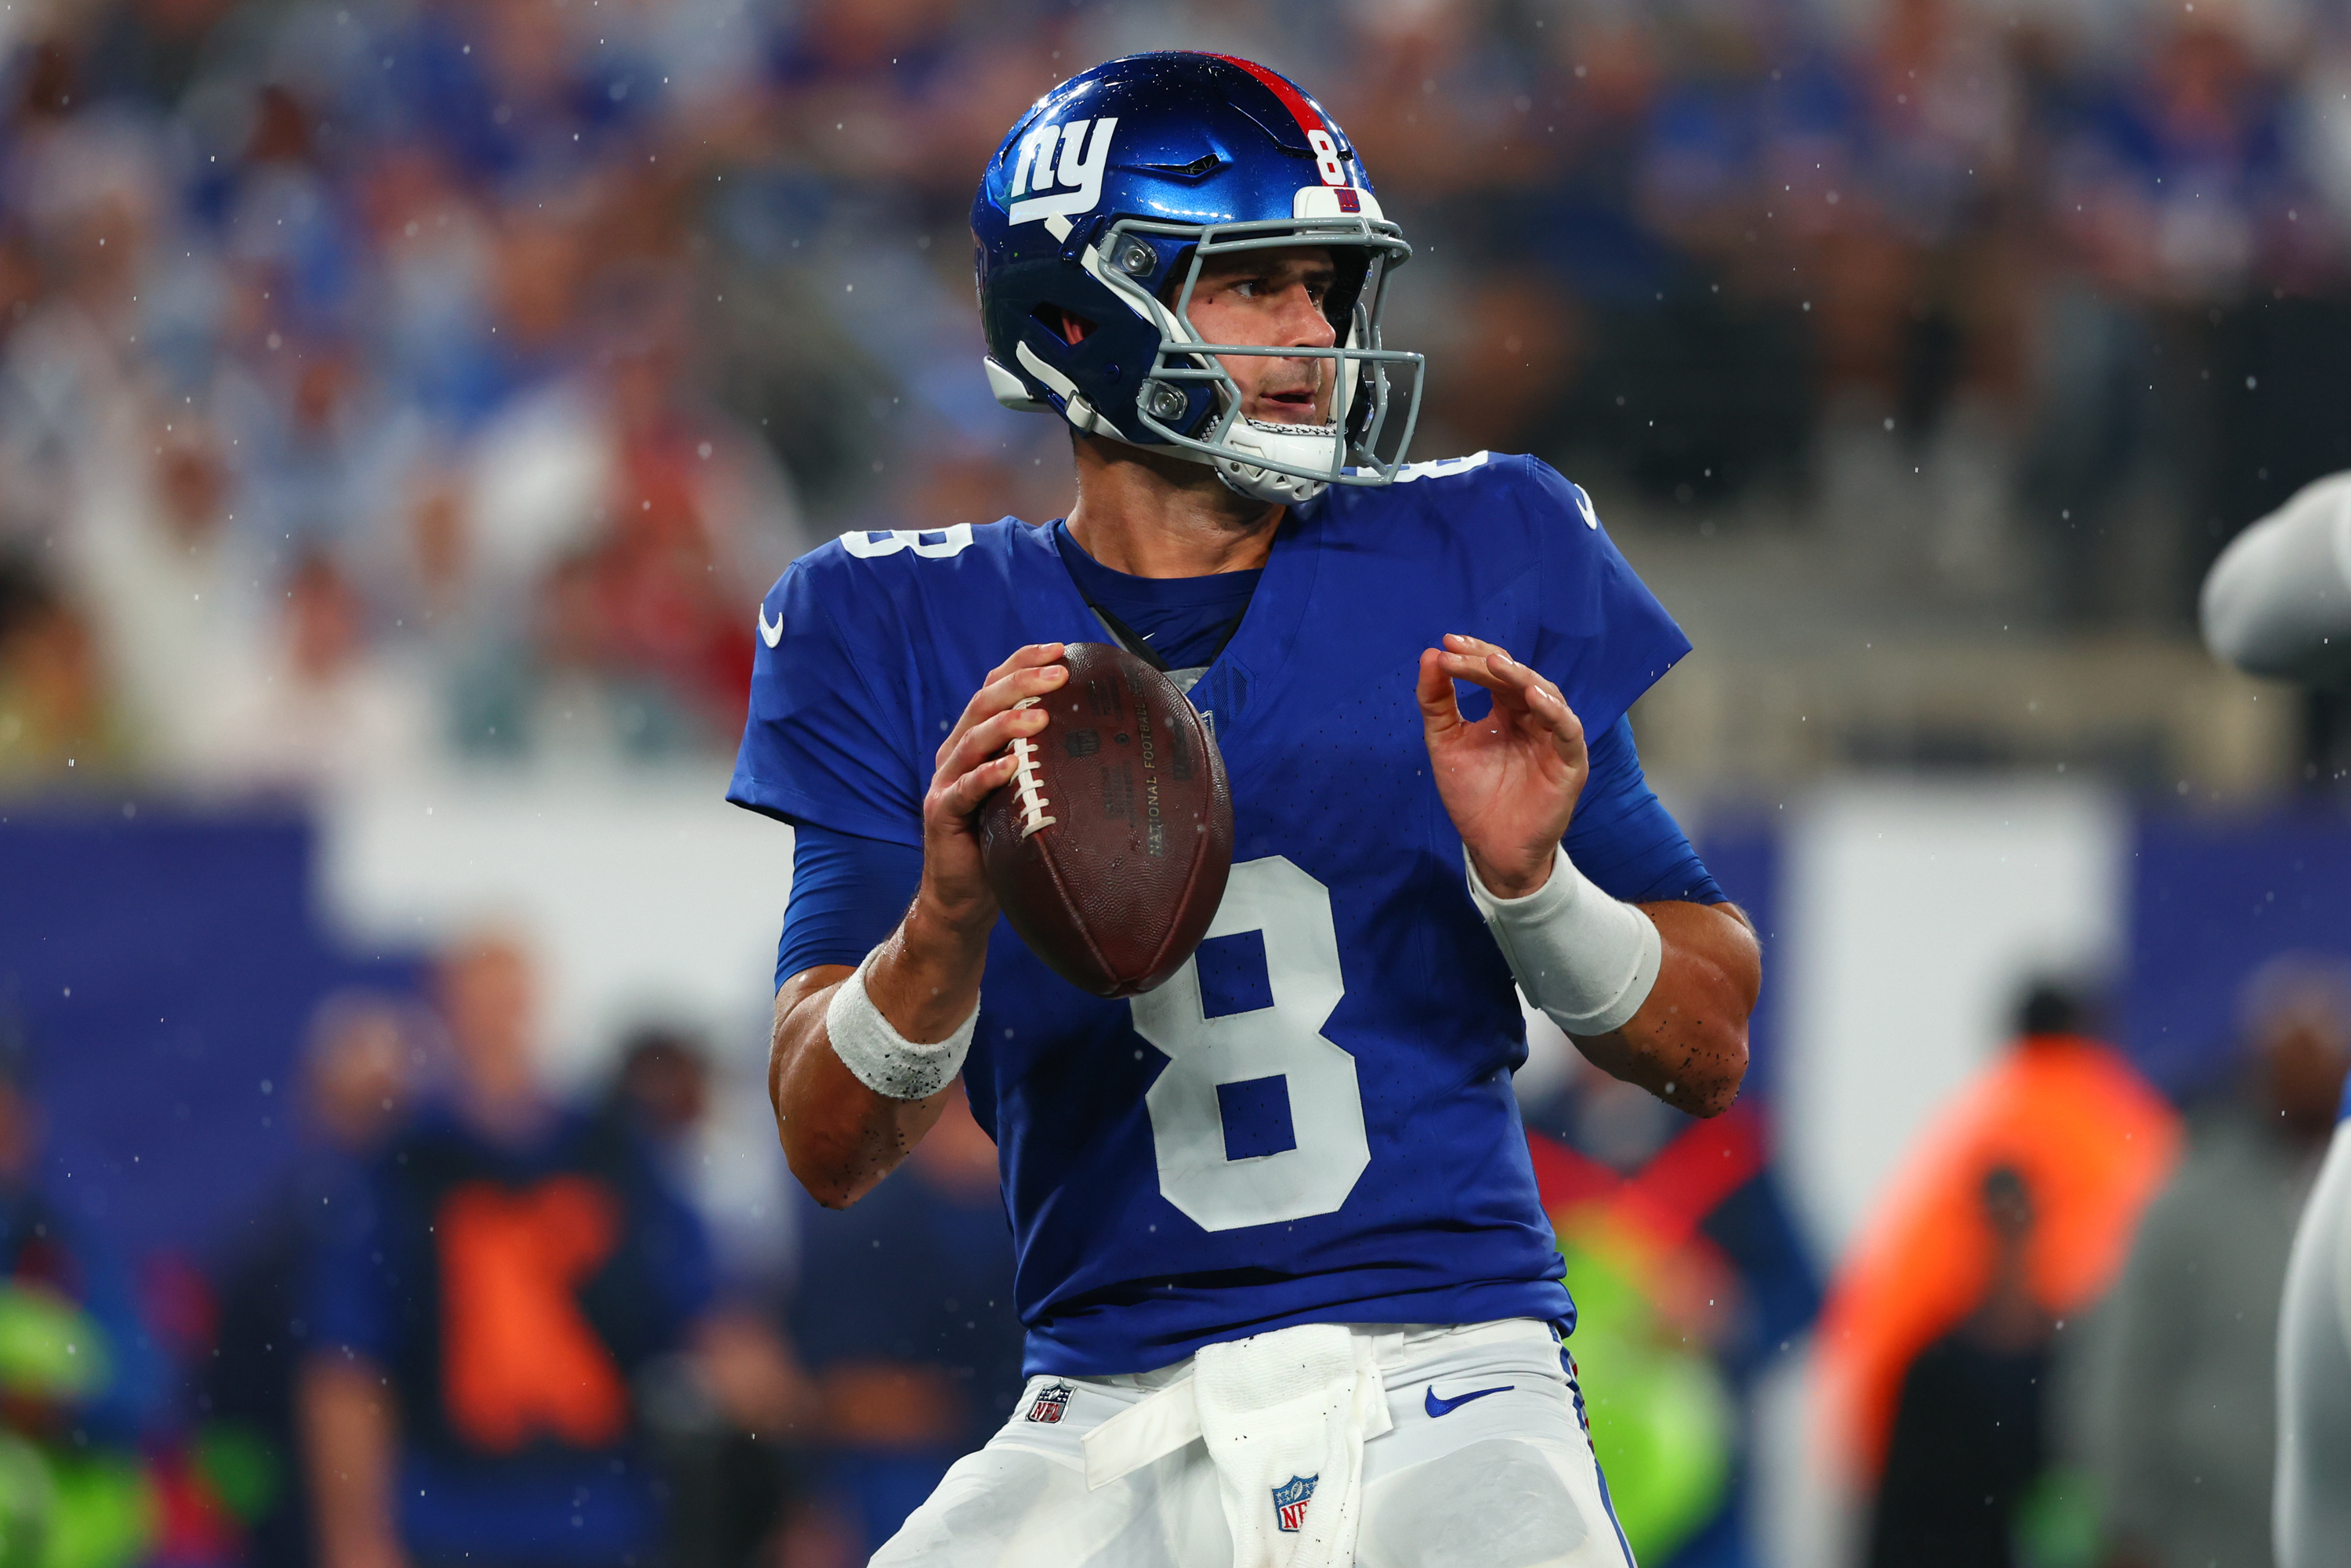 New York Giants quarterback Daniel Jones (8) looks to pass against the Dallas Cowboys during the first half at MetLife Stadium.